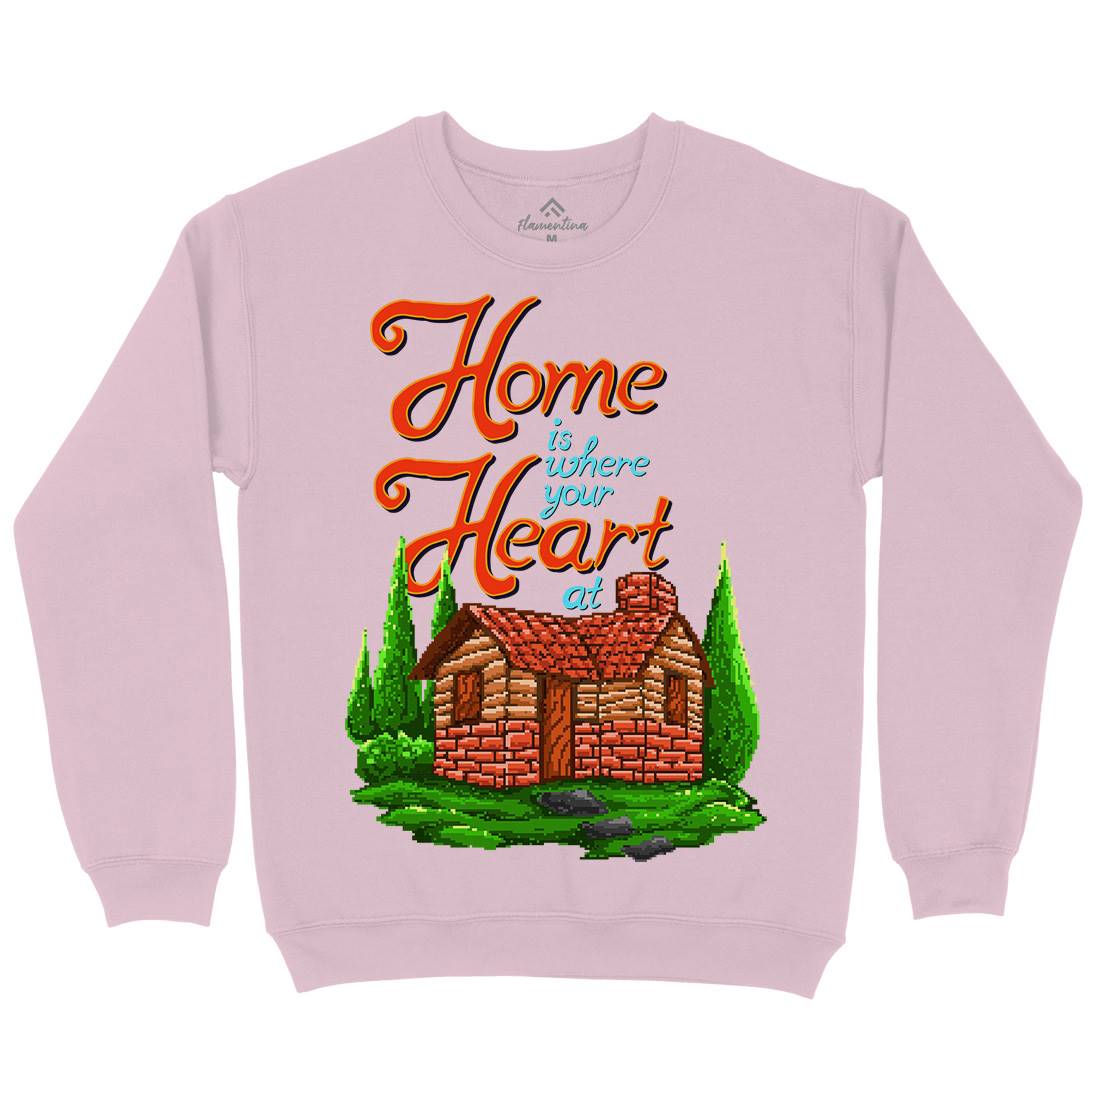 House Is Where Your Heart At Kids Crew Neck Sweatshirt Nature B912